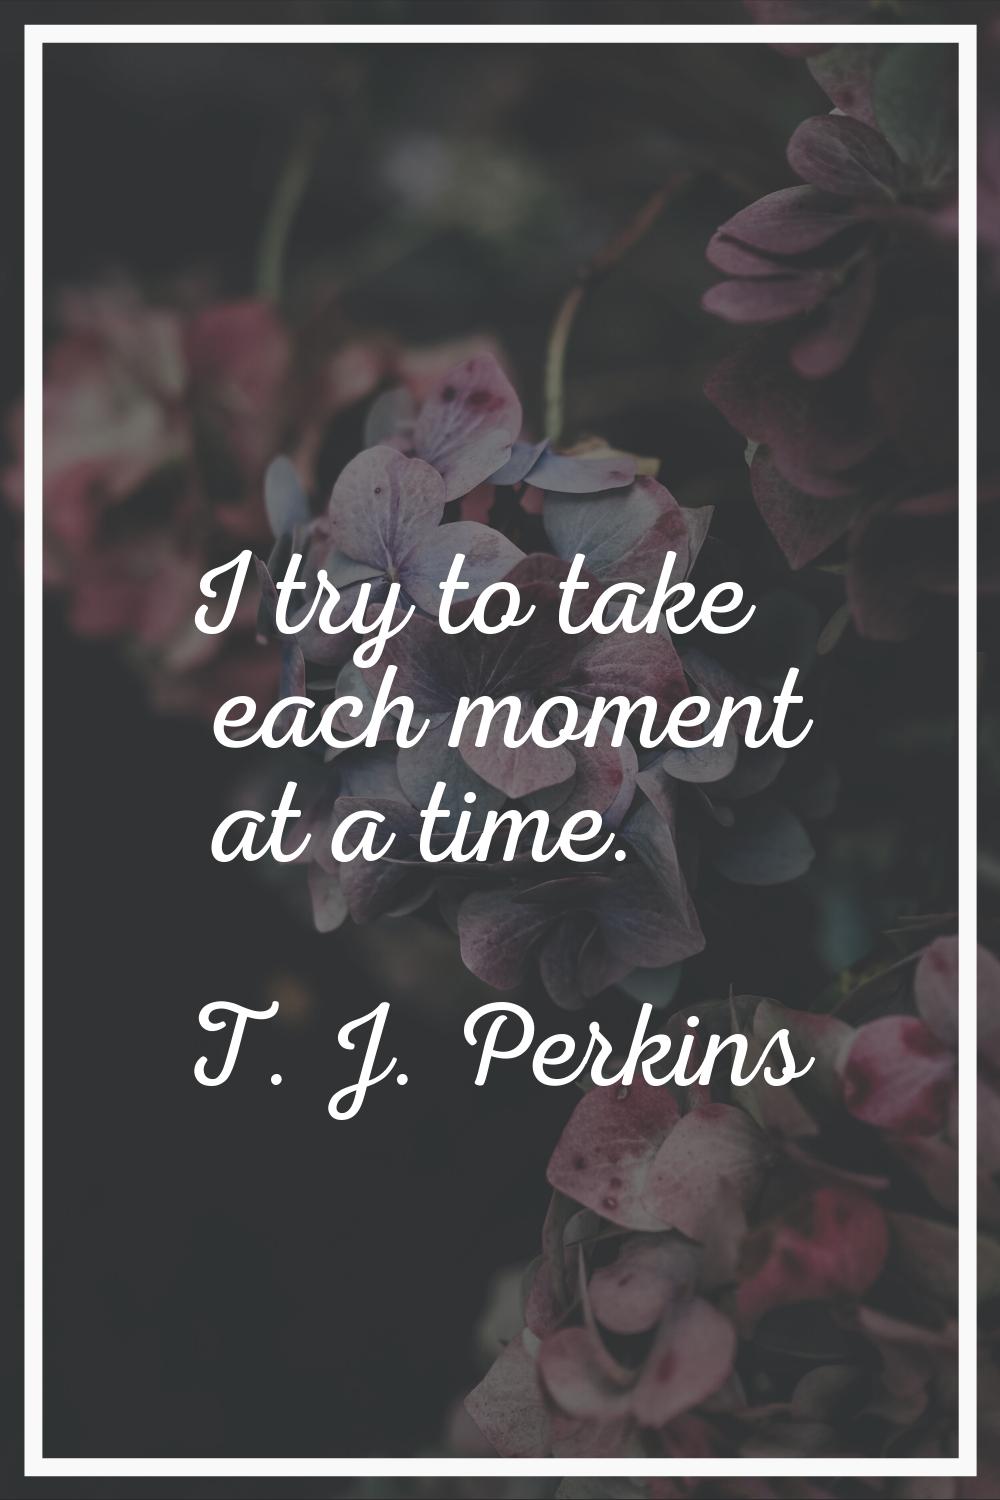 I try to take each moment at a time.